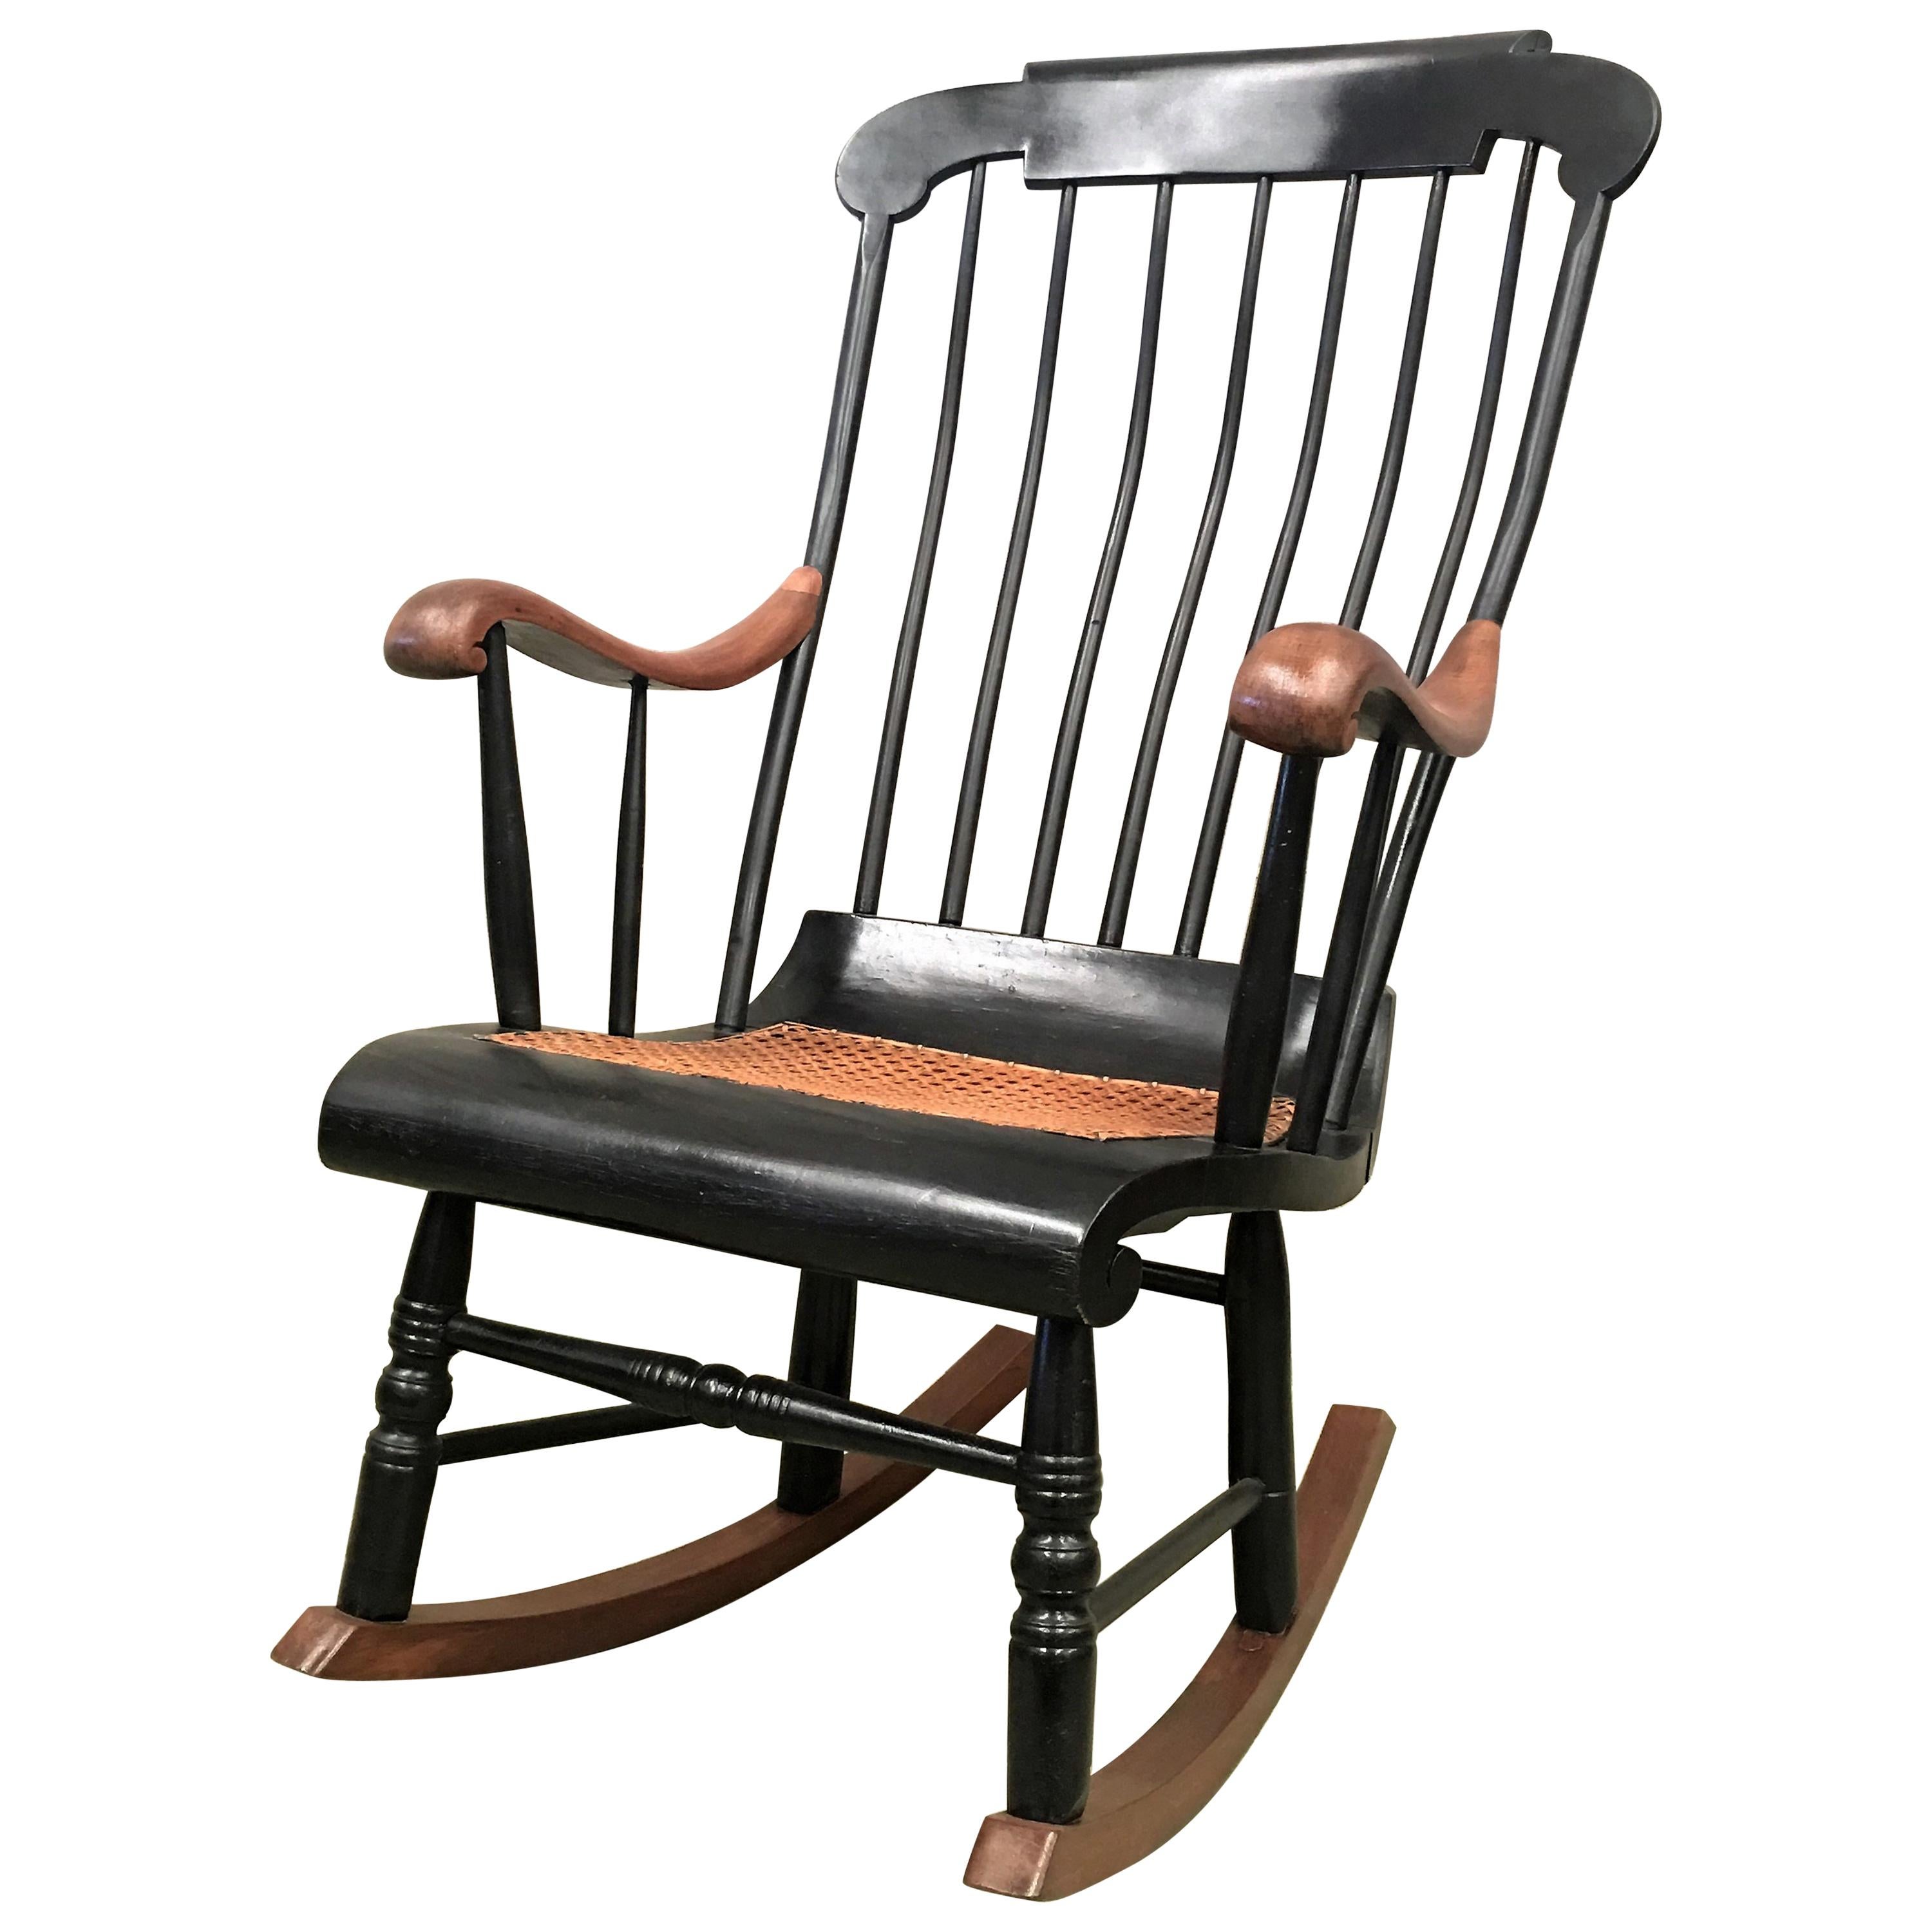 19th Hitchcock Rocking Chair with Woven Seat and Black Painted